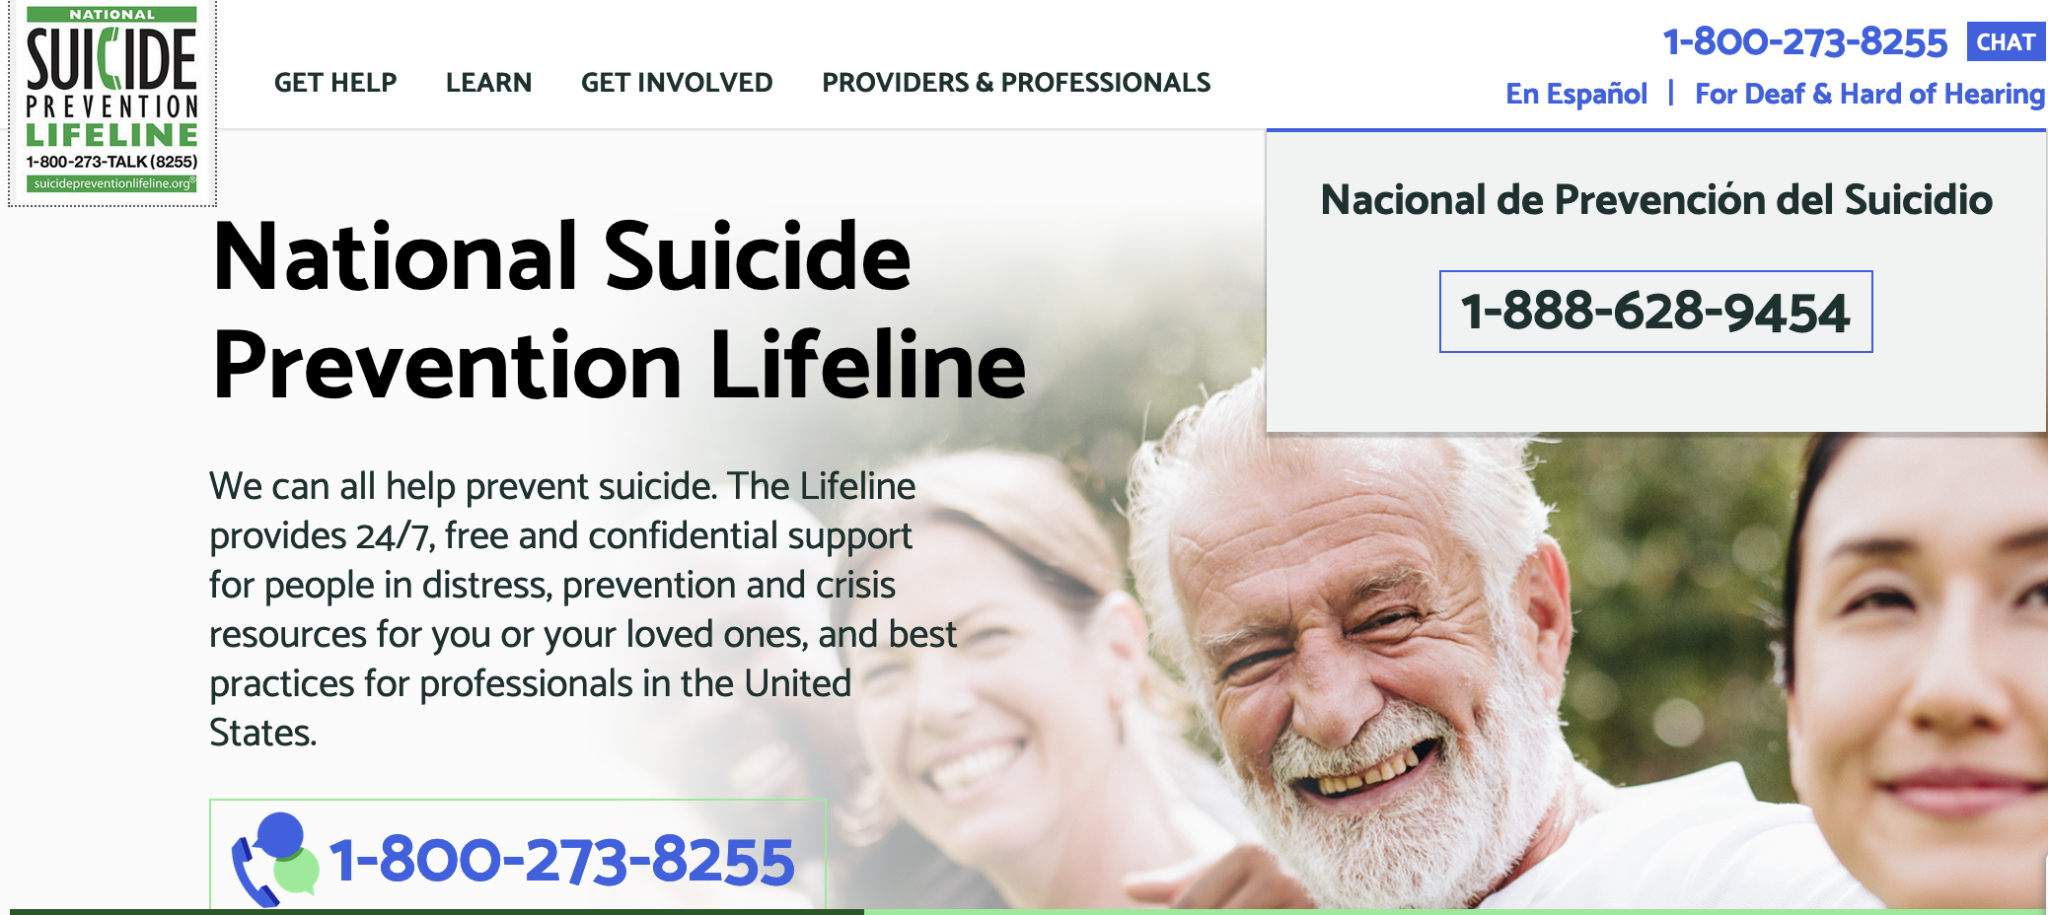 The National Suicide Prevention Lifeline Network And 988